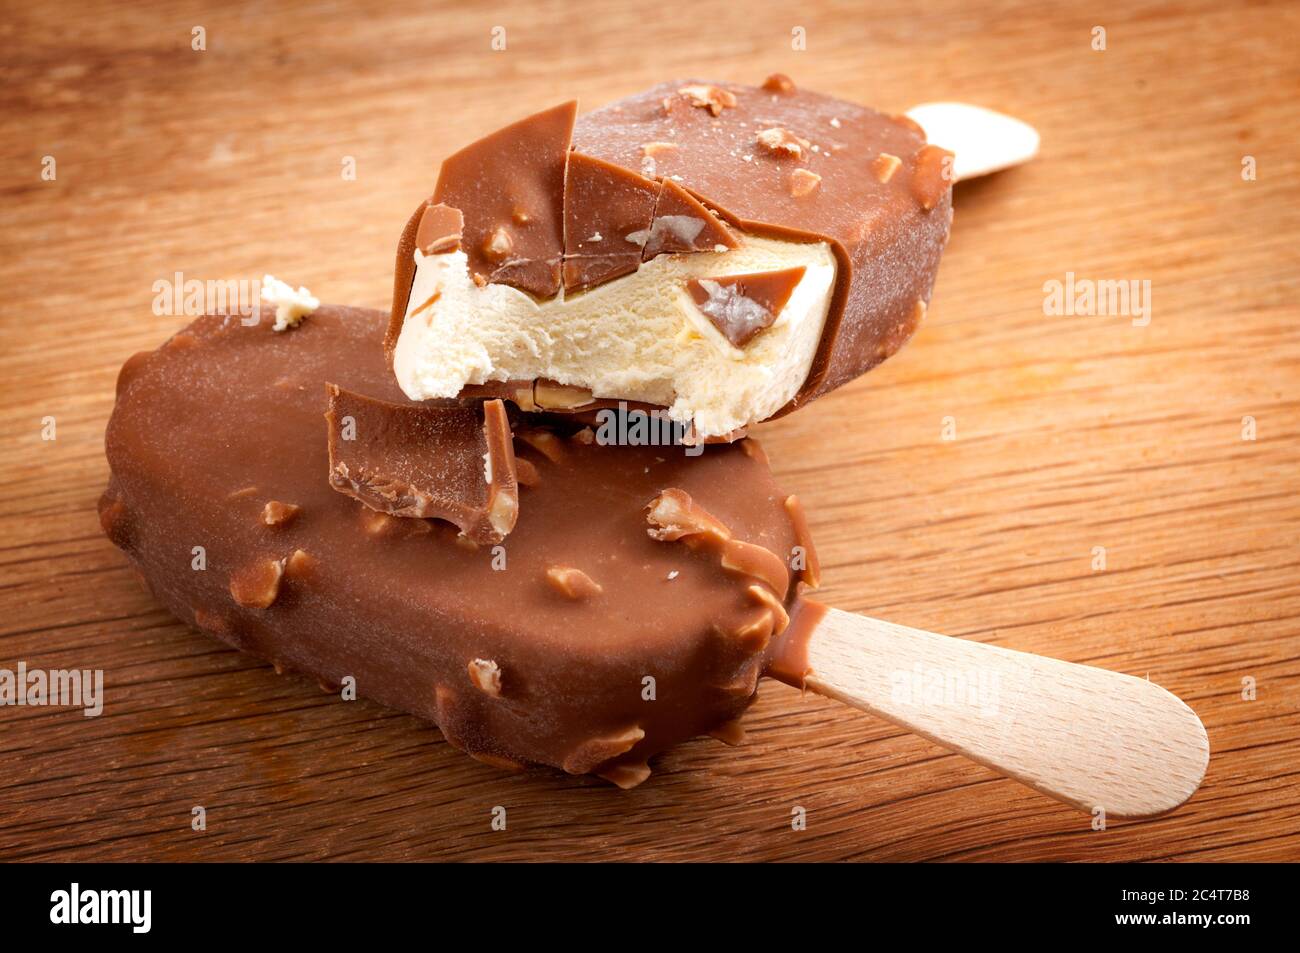 Refreshing summer food, icy cold dessert and frozen snack concept with close up on vanilla, hazelnut and chocolate ice cream bars, stacked together wi Stock Photo